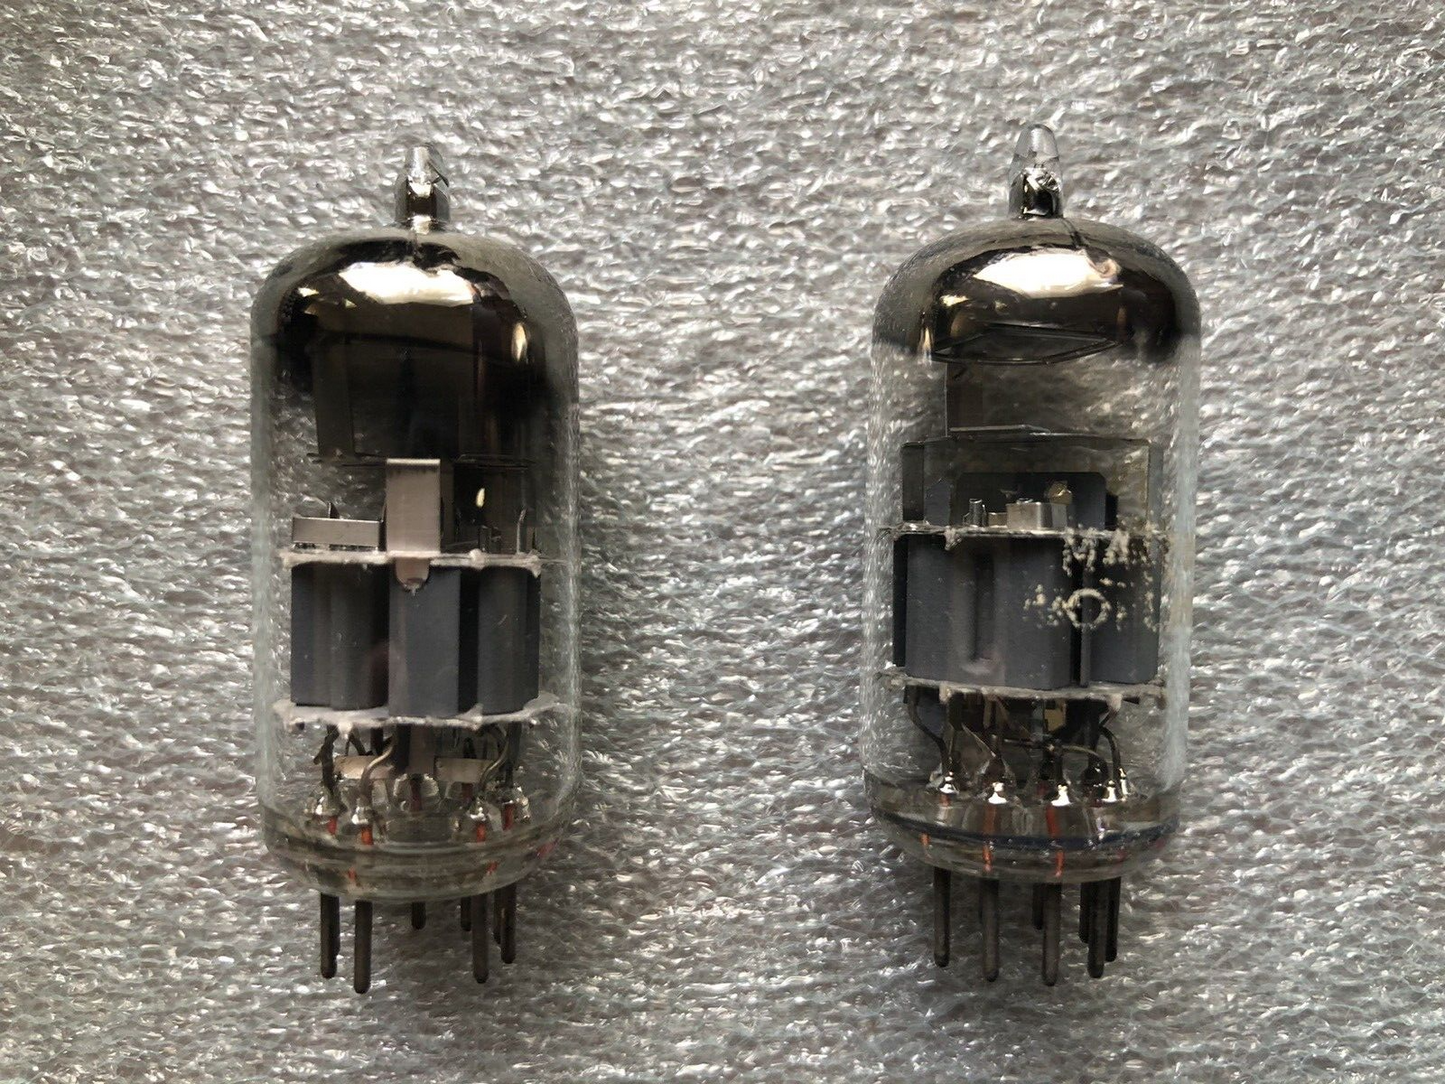 Philips PCC88 7DJ8 6DJ8 D-getter Preamp Tubes Matched Pair Holland 1958/59 - NOS